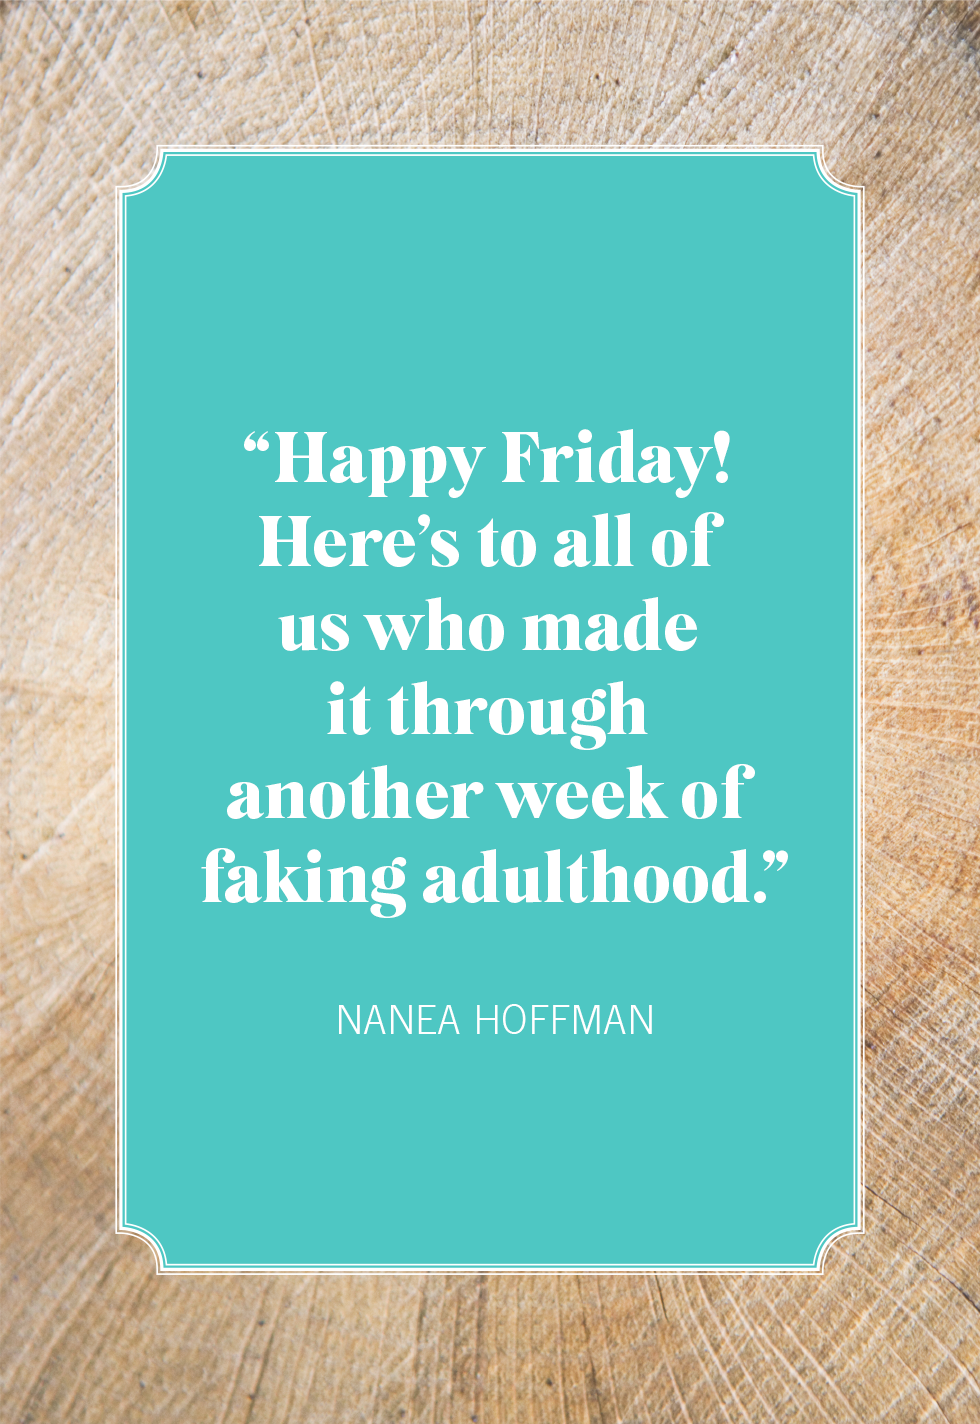 20 Best Friday Quotes to Kick Off the Weekend